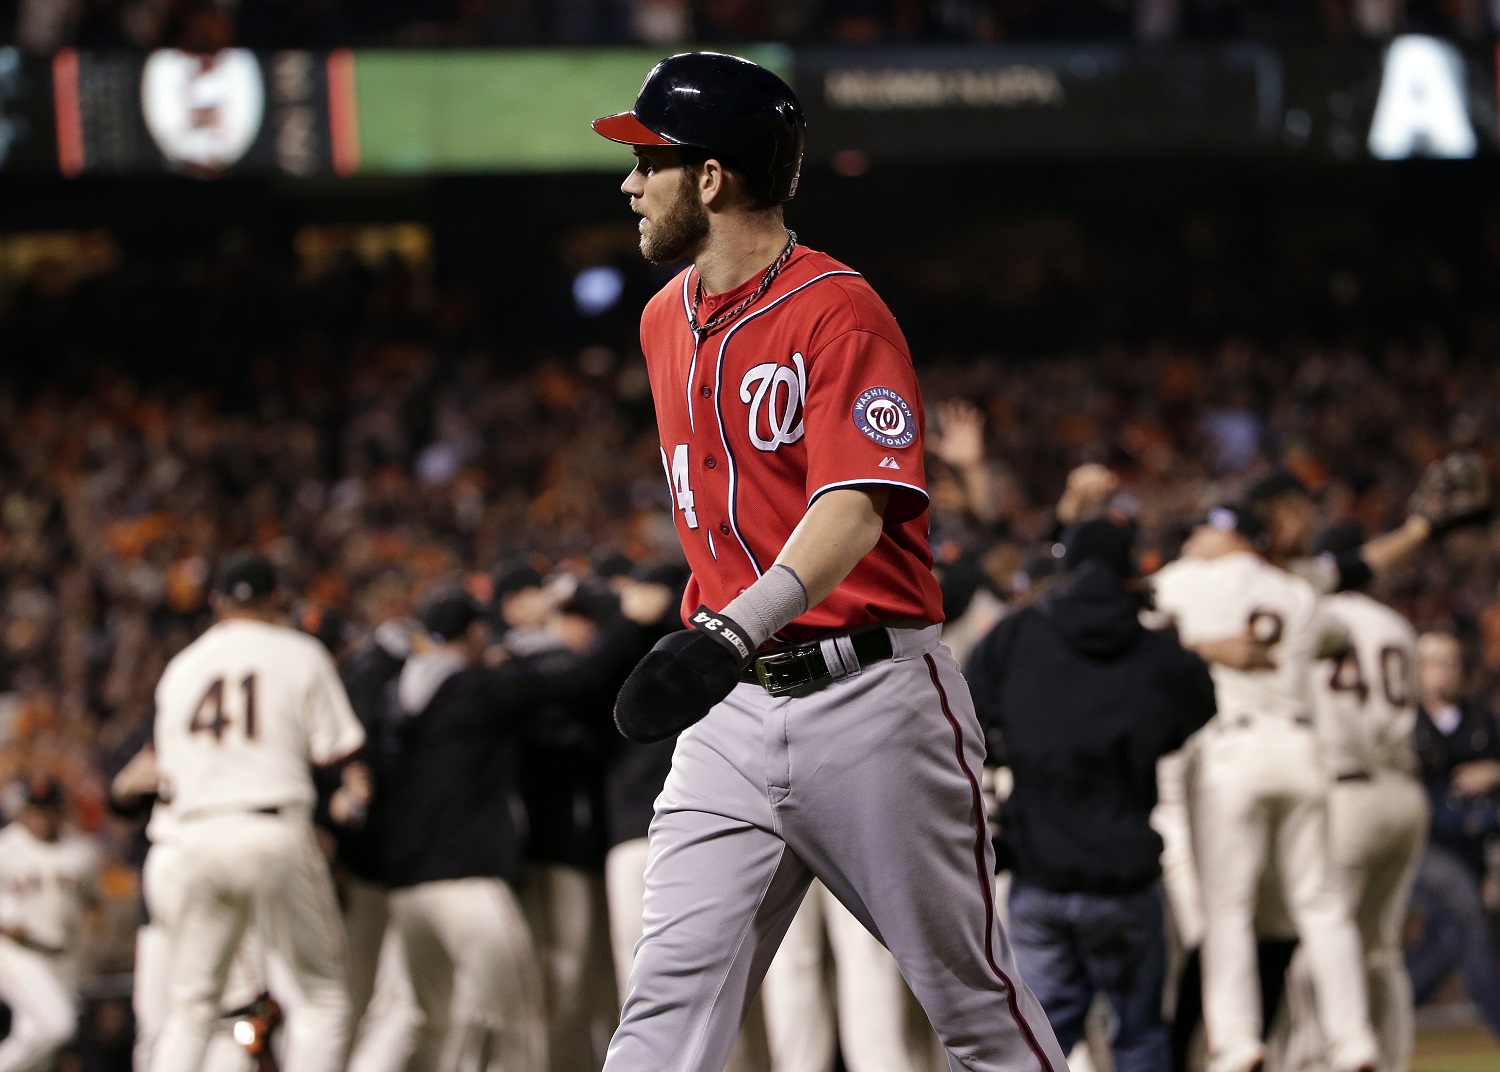 Washington Nationals right fielder Bryce Harper walks off the field after Game 4 of baseball's NL Division Series in San Francisco, Tuesday, Oct. 7, 2014. The Giants beat the Nationals 3-2 to advance to the next round. (AP Photo/Marcio Jose Sanchez)